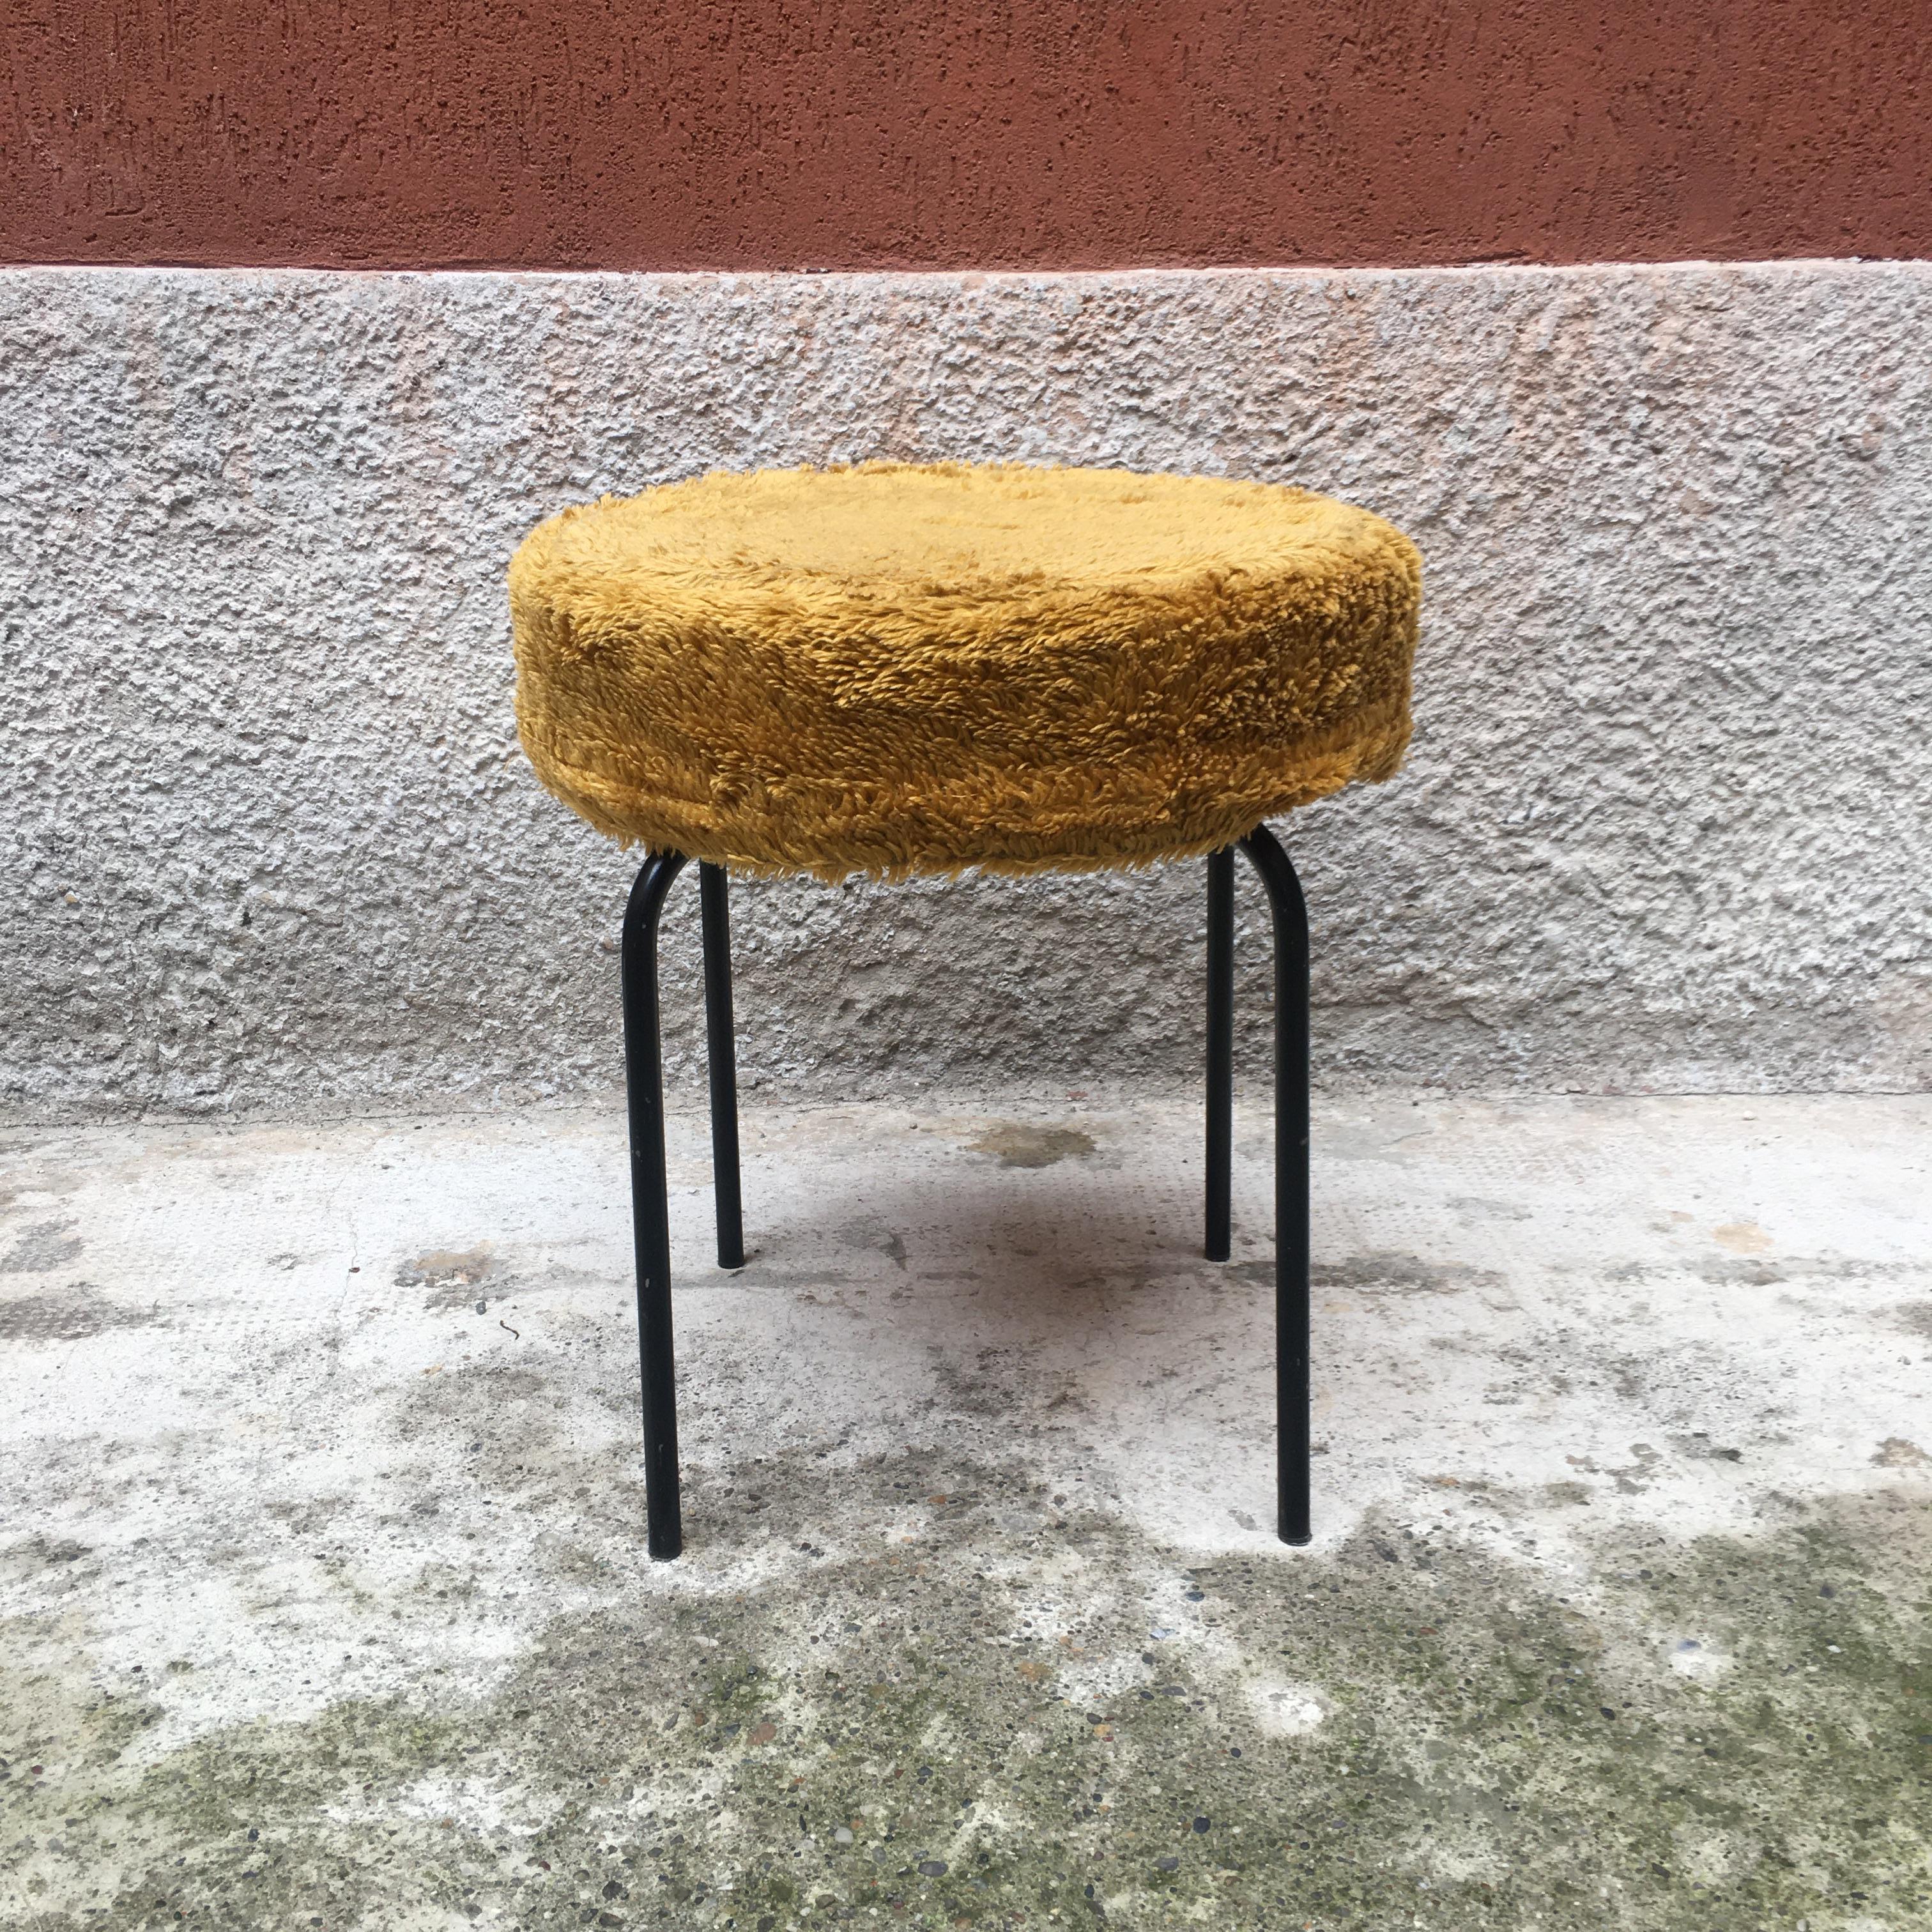 Nord European pouf, with black metal rod legs and seat covered with its original removable yellow fabric
Good conditions.